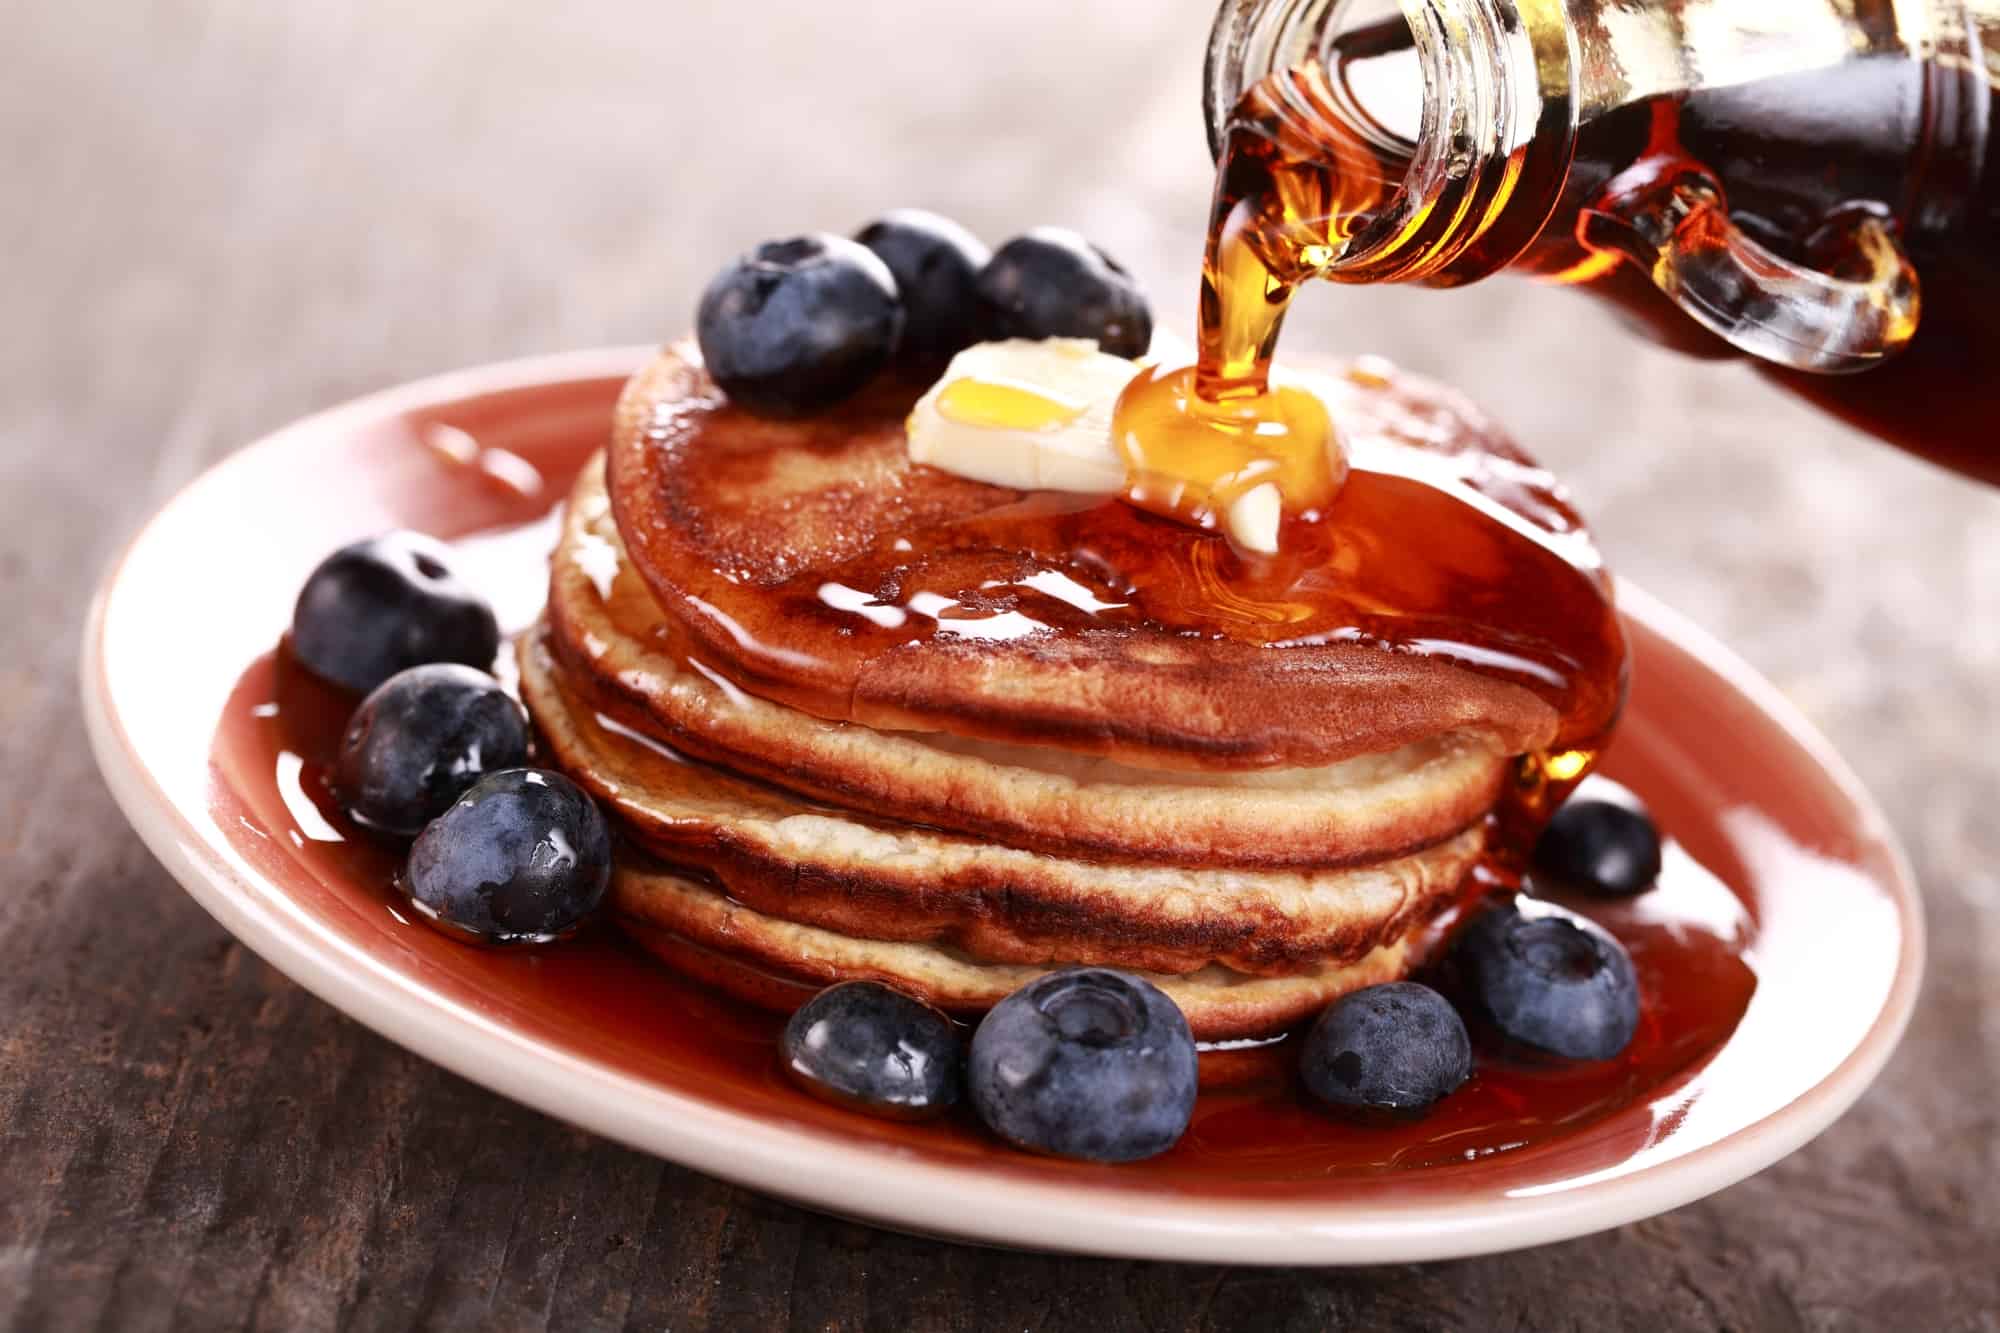 A jar of maple syrup being drizzled onto a stack of pancakes topped with blueberries on a nuetral colored background.